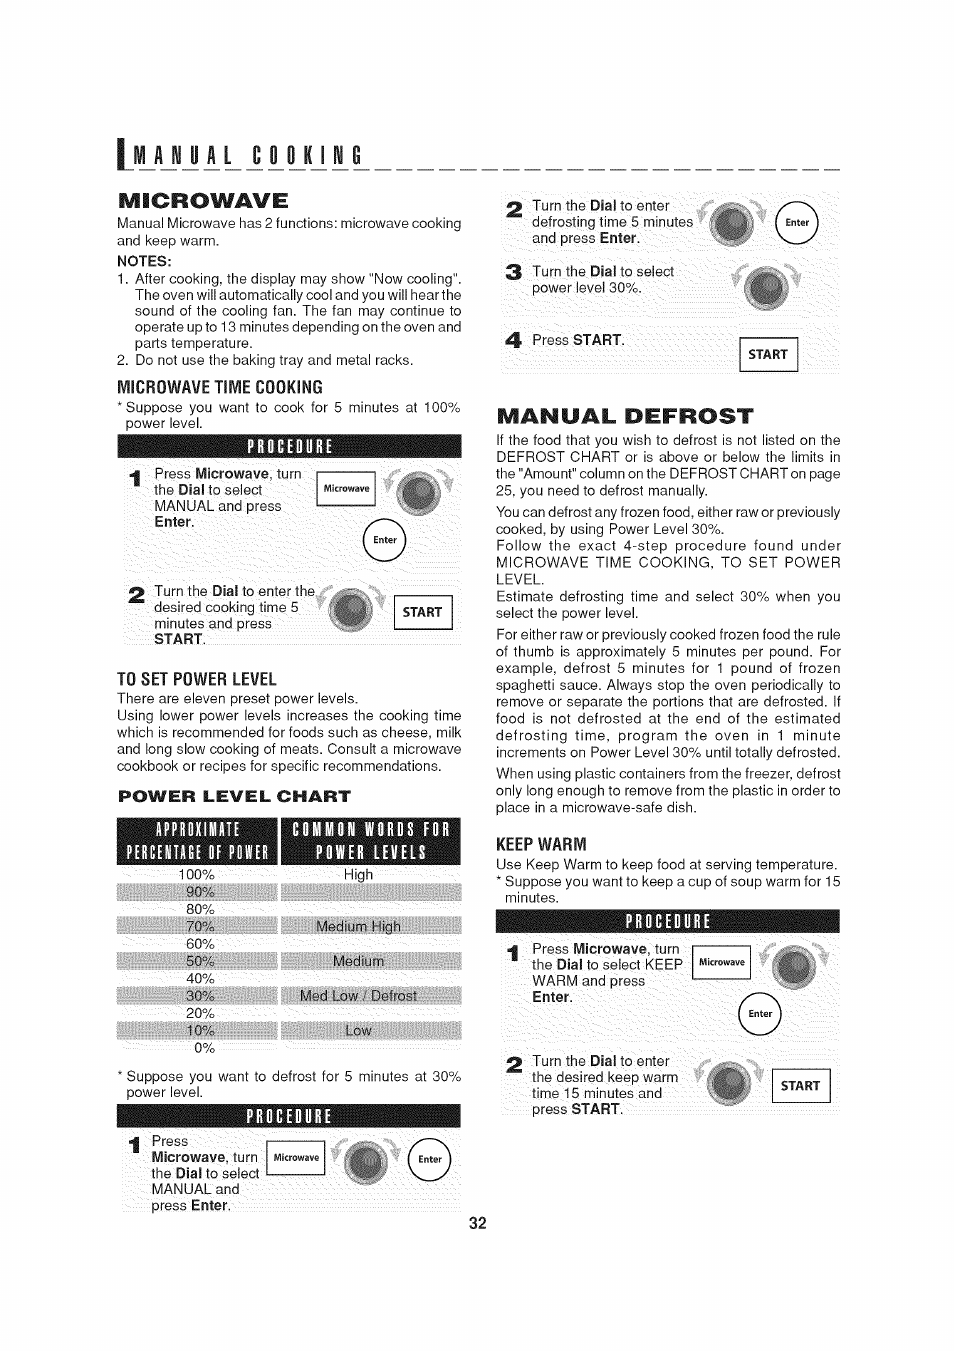 Microwave, Microwave time cooking, Prflceoure | To set power level, Procedure, Manual defrost, Keep warm, L«lajjilliyim | Sharp AX-1200 User Manual | Page 36 / 43